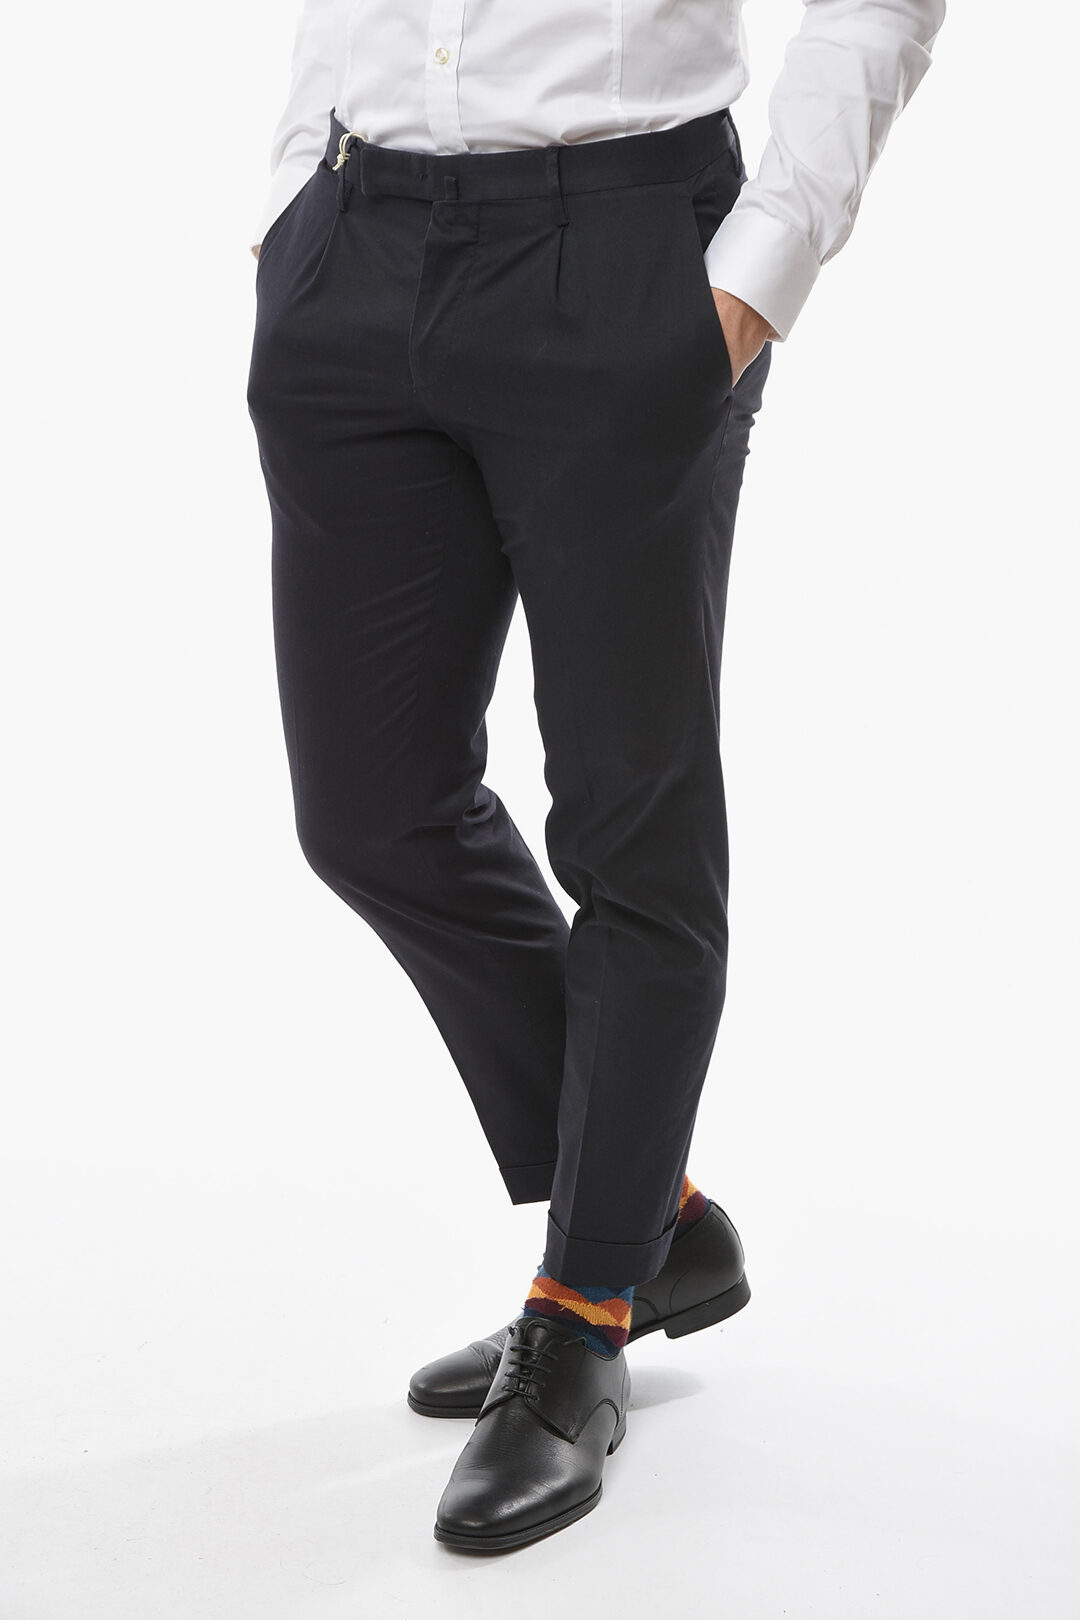 Limited Collection Men's Navy Wool Blend Single Pleat Trousers | Konga  Online Shopping